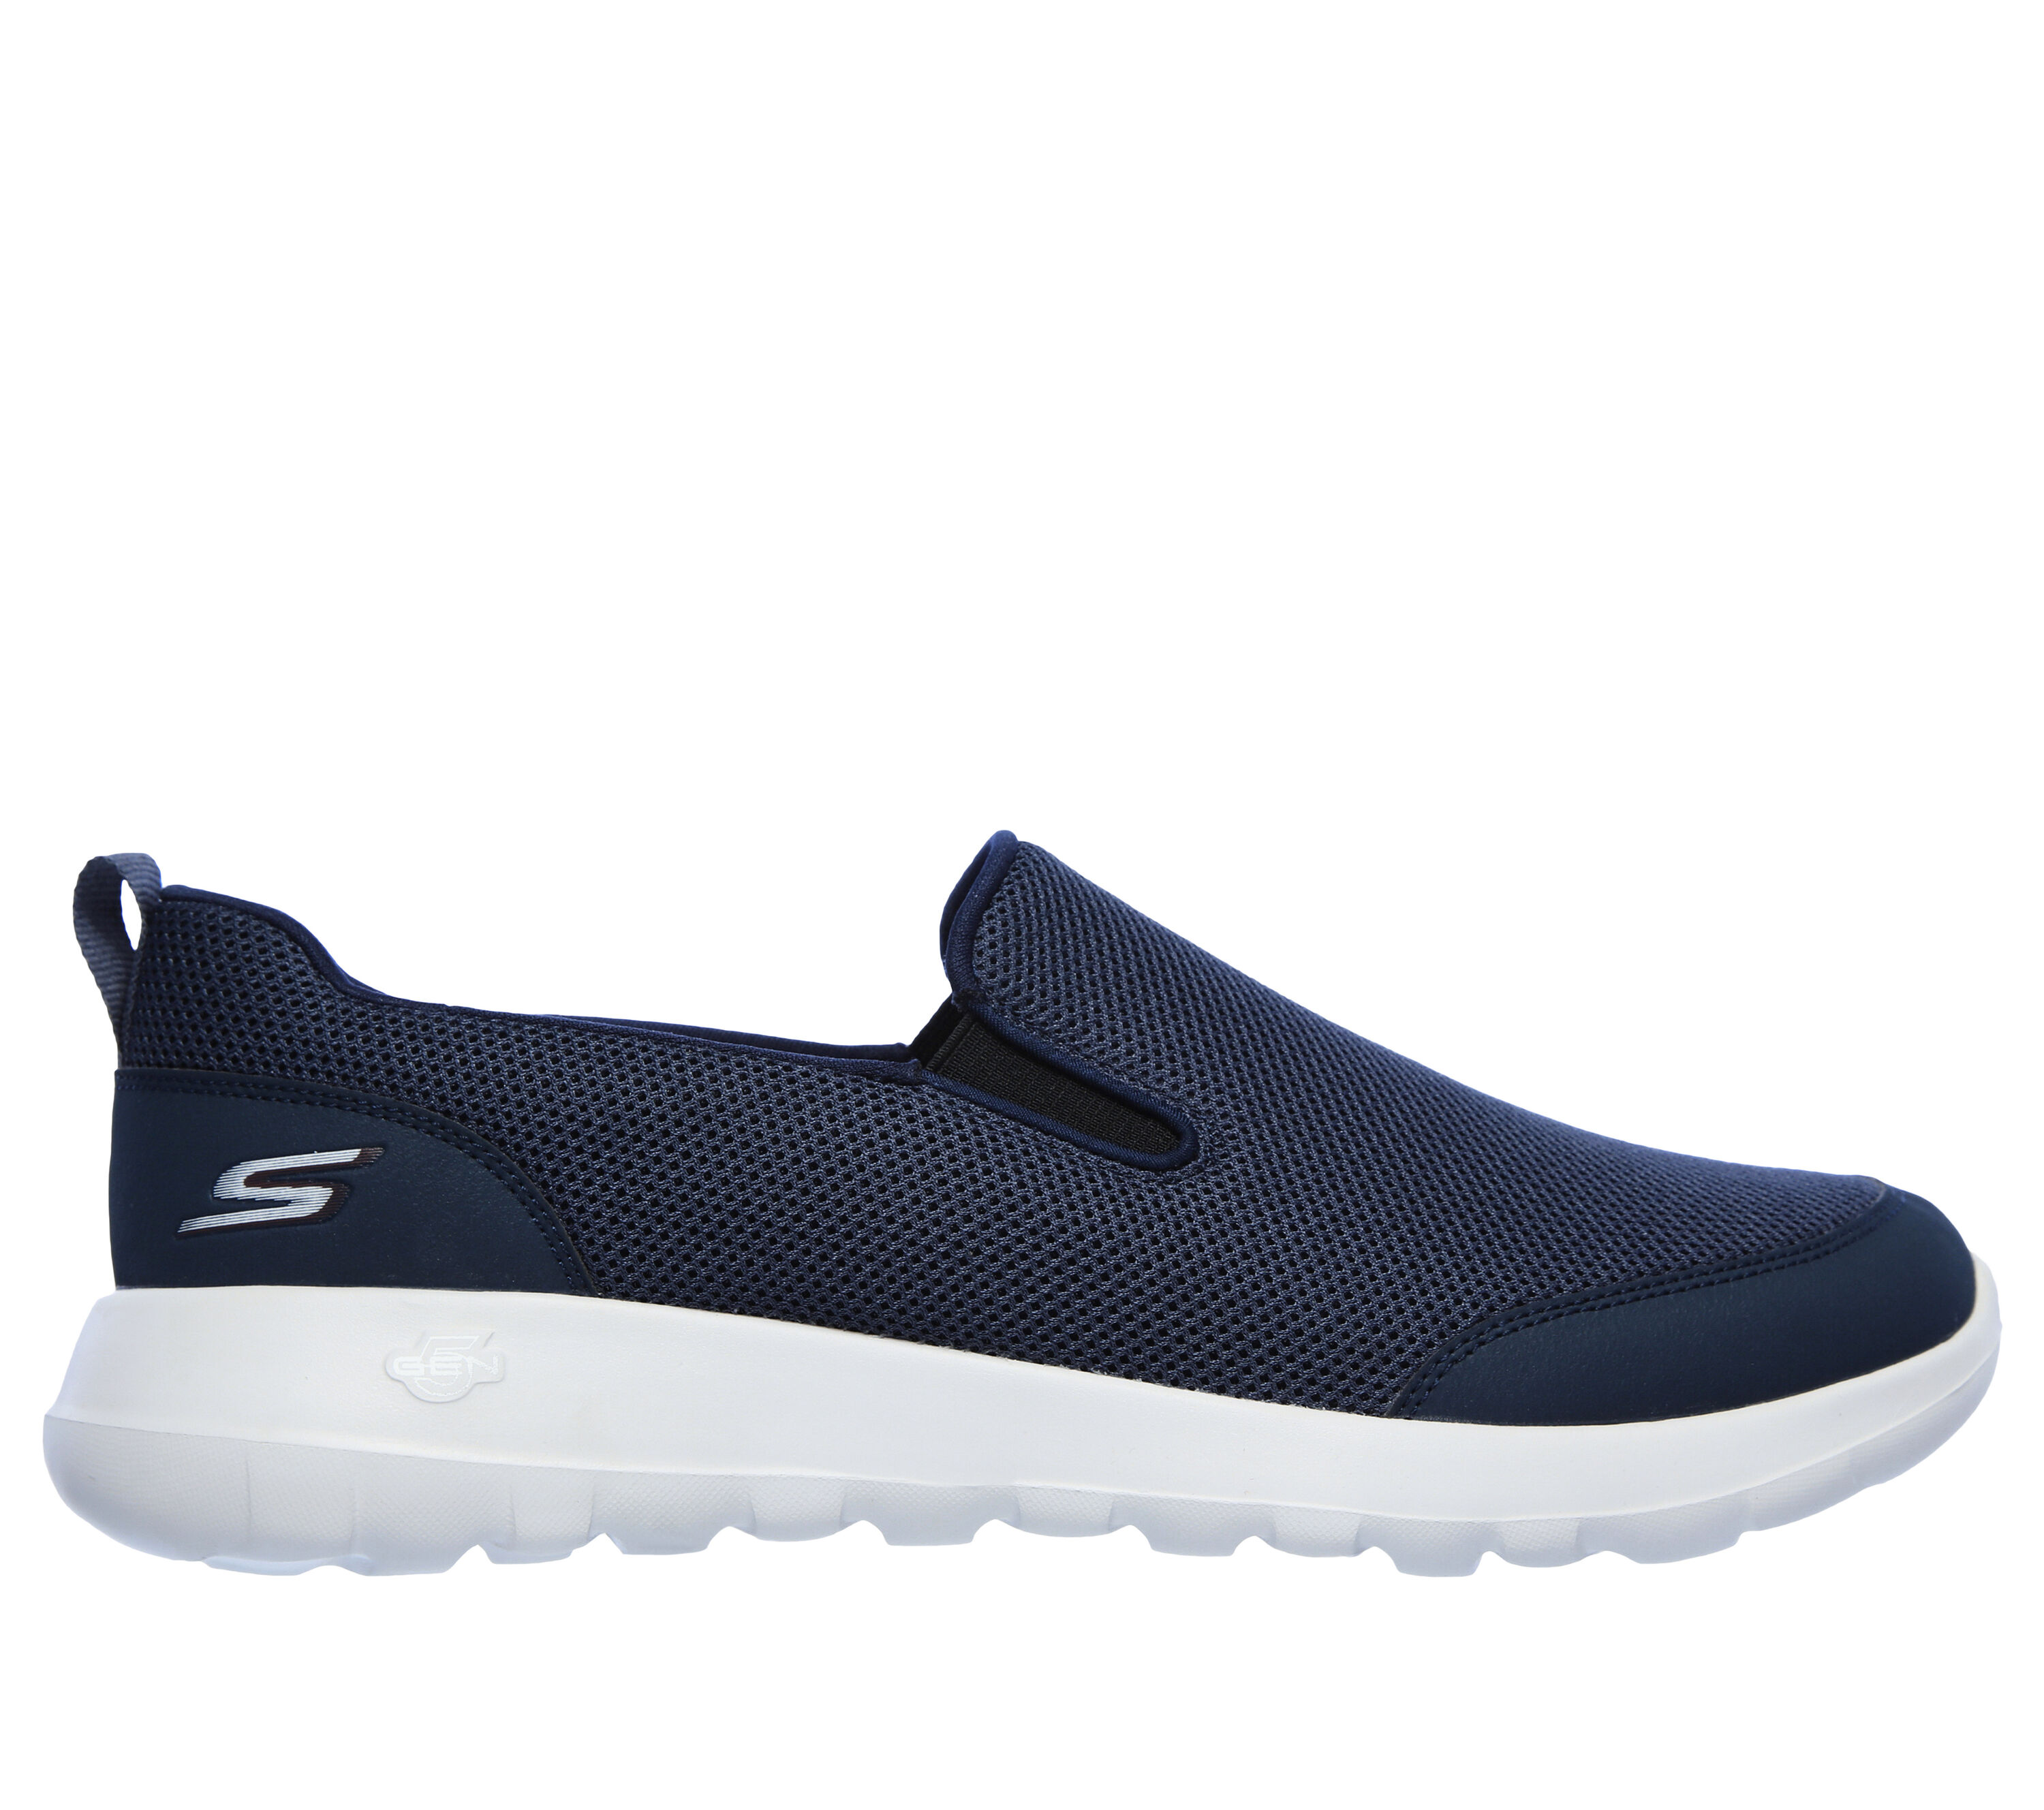 Shop the Skechers GOwalk Max - Clinched | SKECHERS